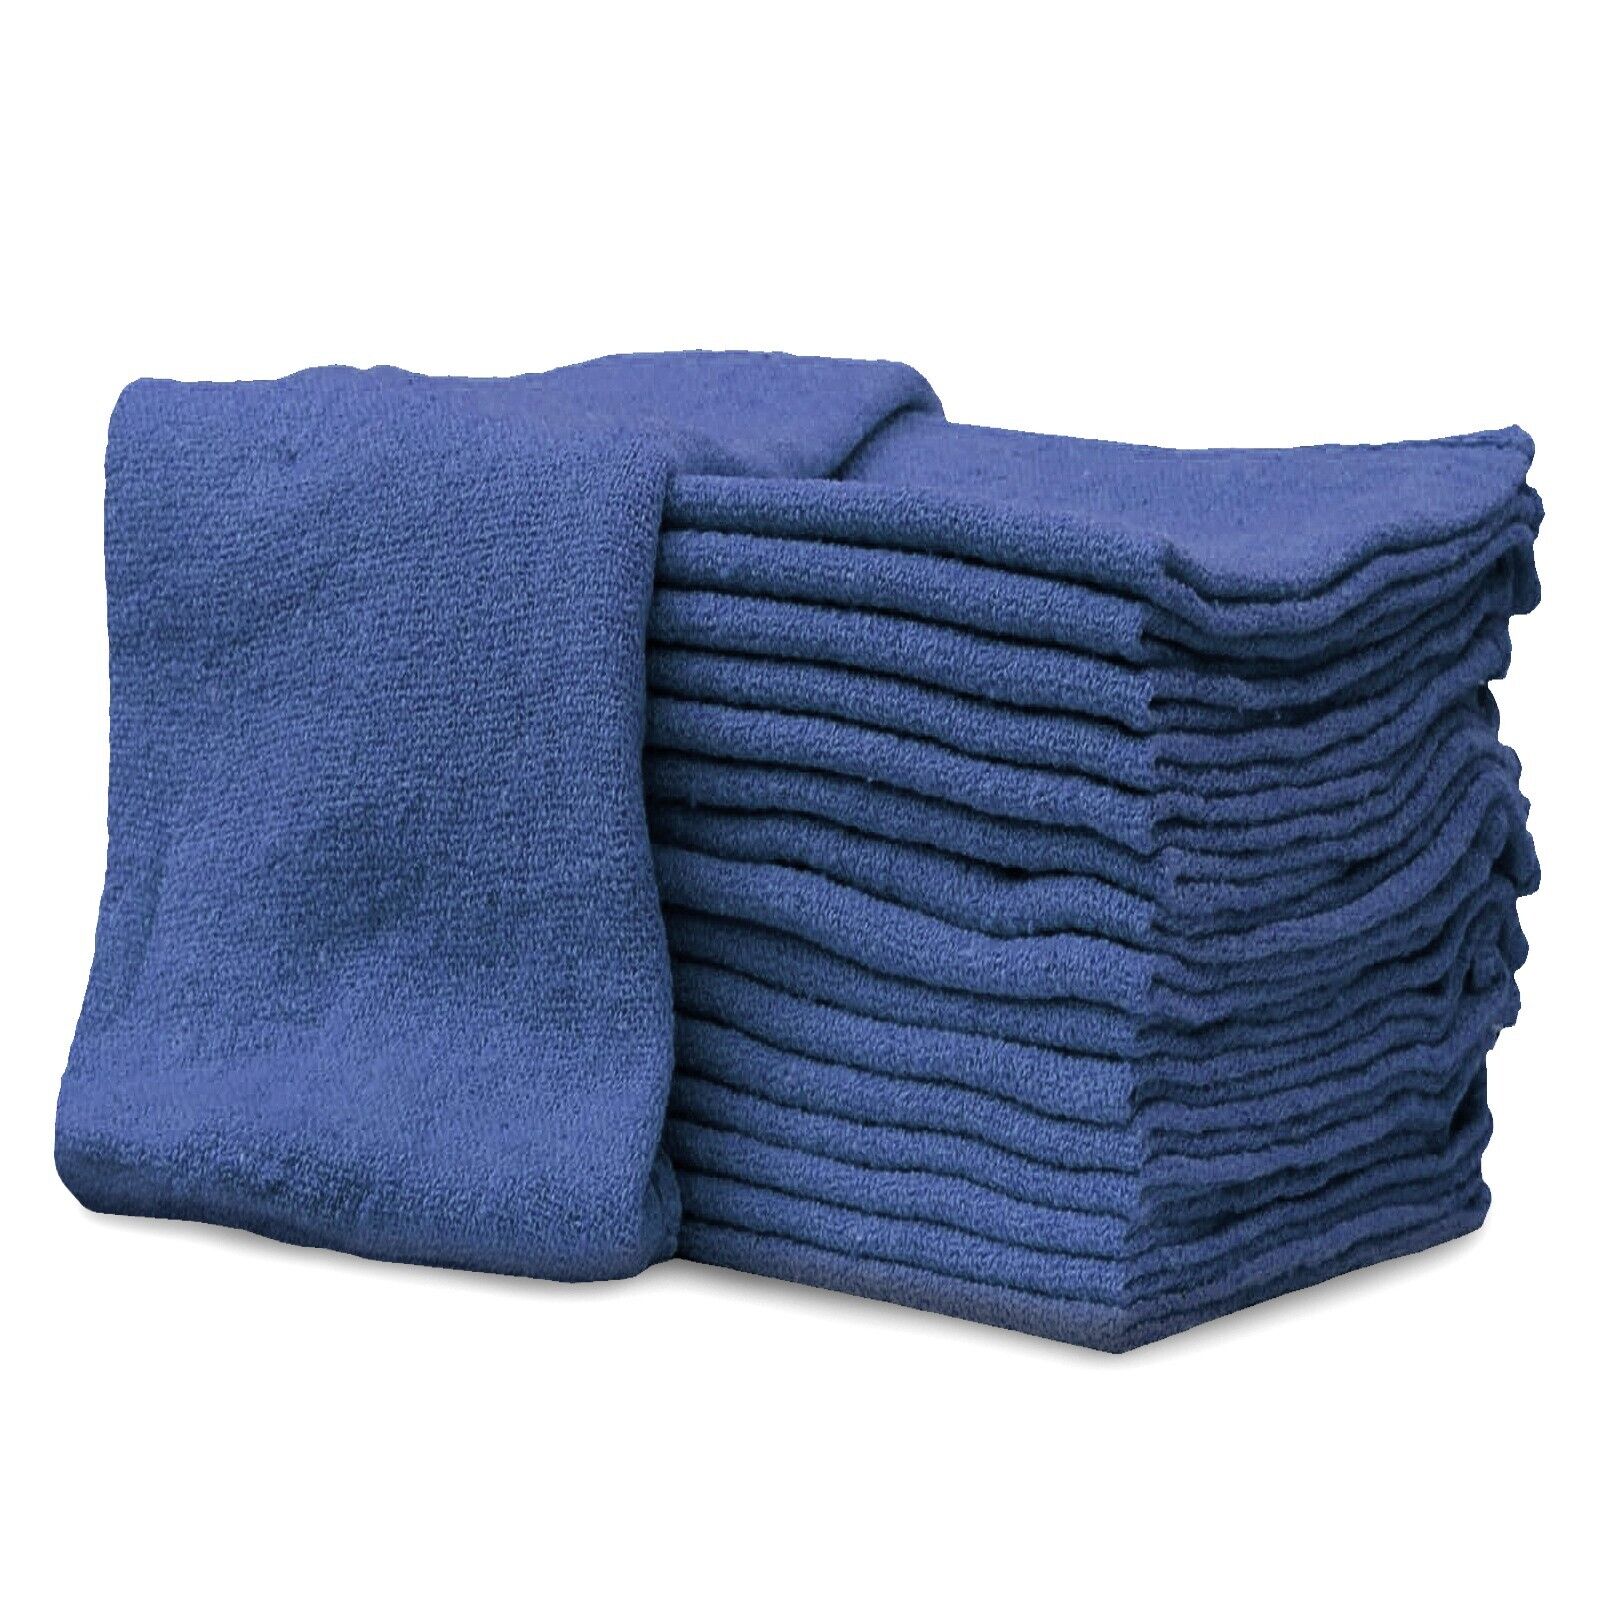 2000 New Industrial A-Grade Shop Rags -Cleaning Towels Blue - Multipurpose Cloth